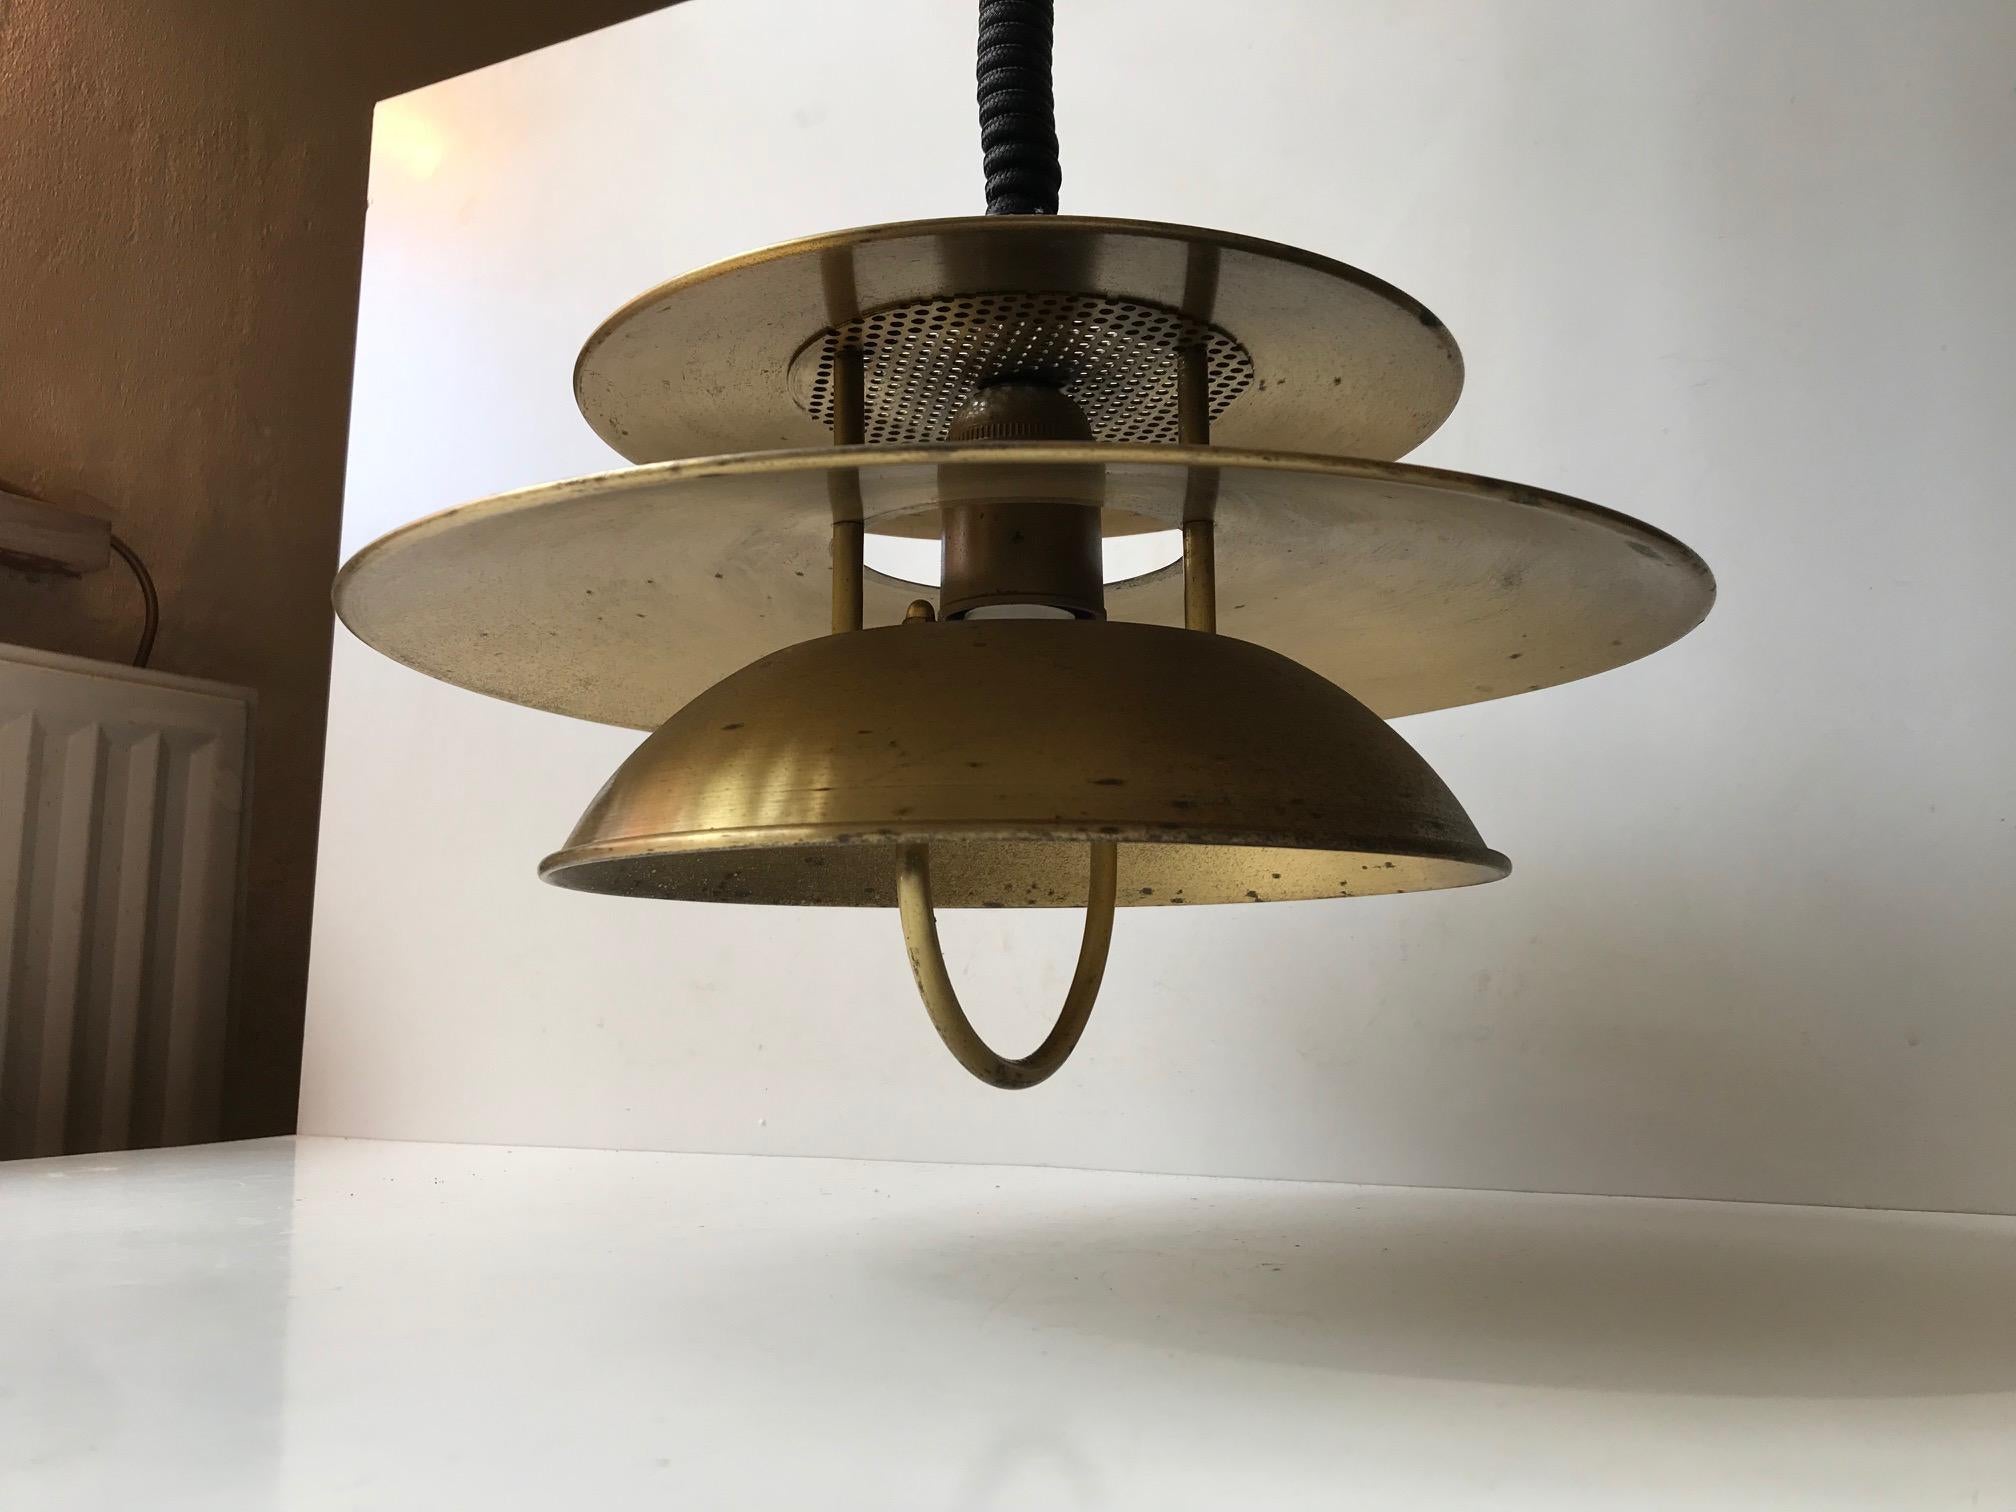 Tiered/multi-shaded hanging light with suspensions system - rise and fall. Hereby the height is easily adjusted by hand. Designed and manufactured by Vitrika in Denmark during the early 1970s. It has a Maritim/Nautical appearance. The construction